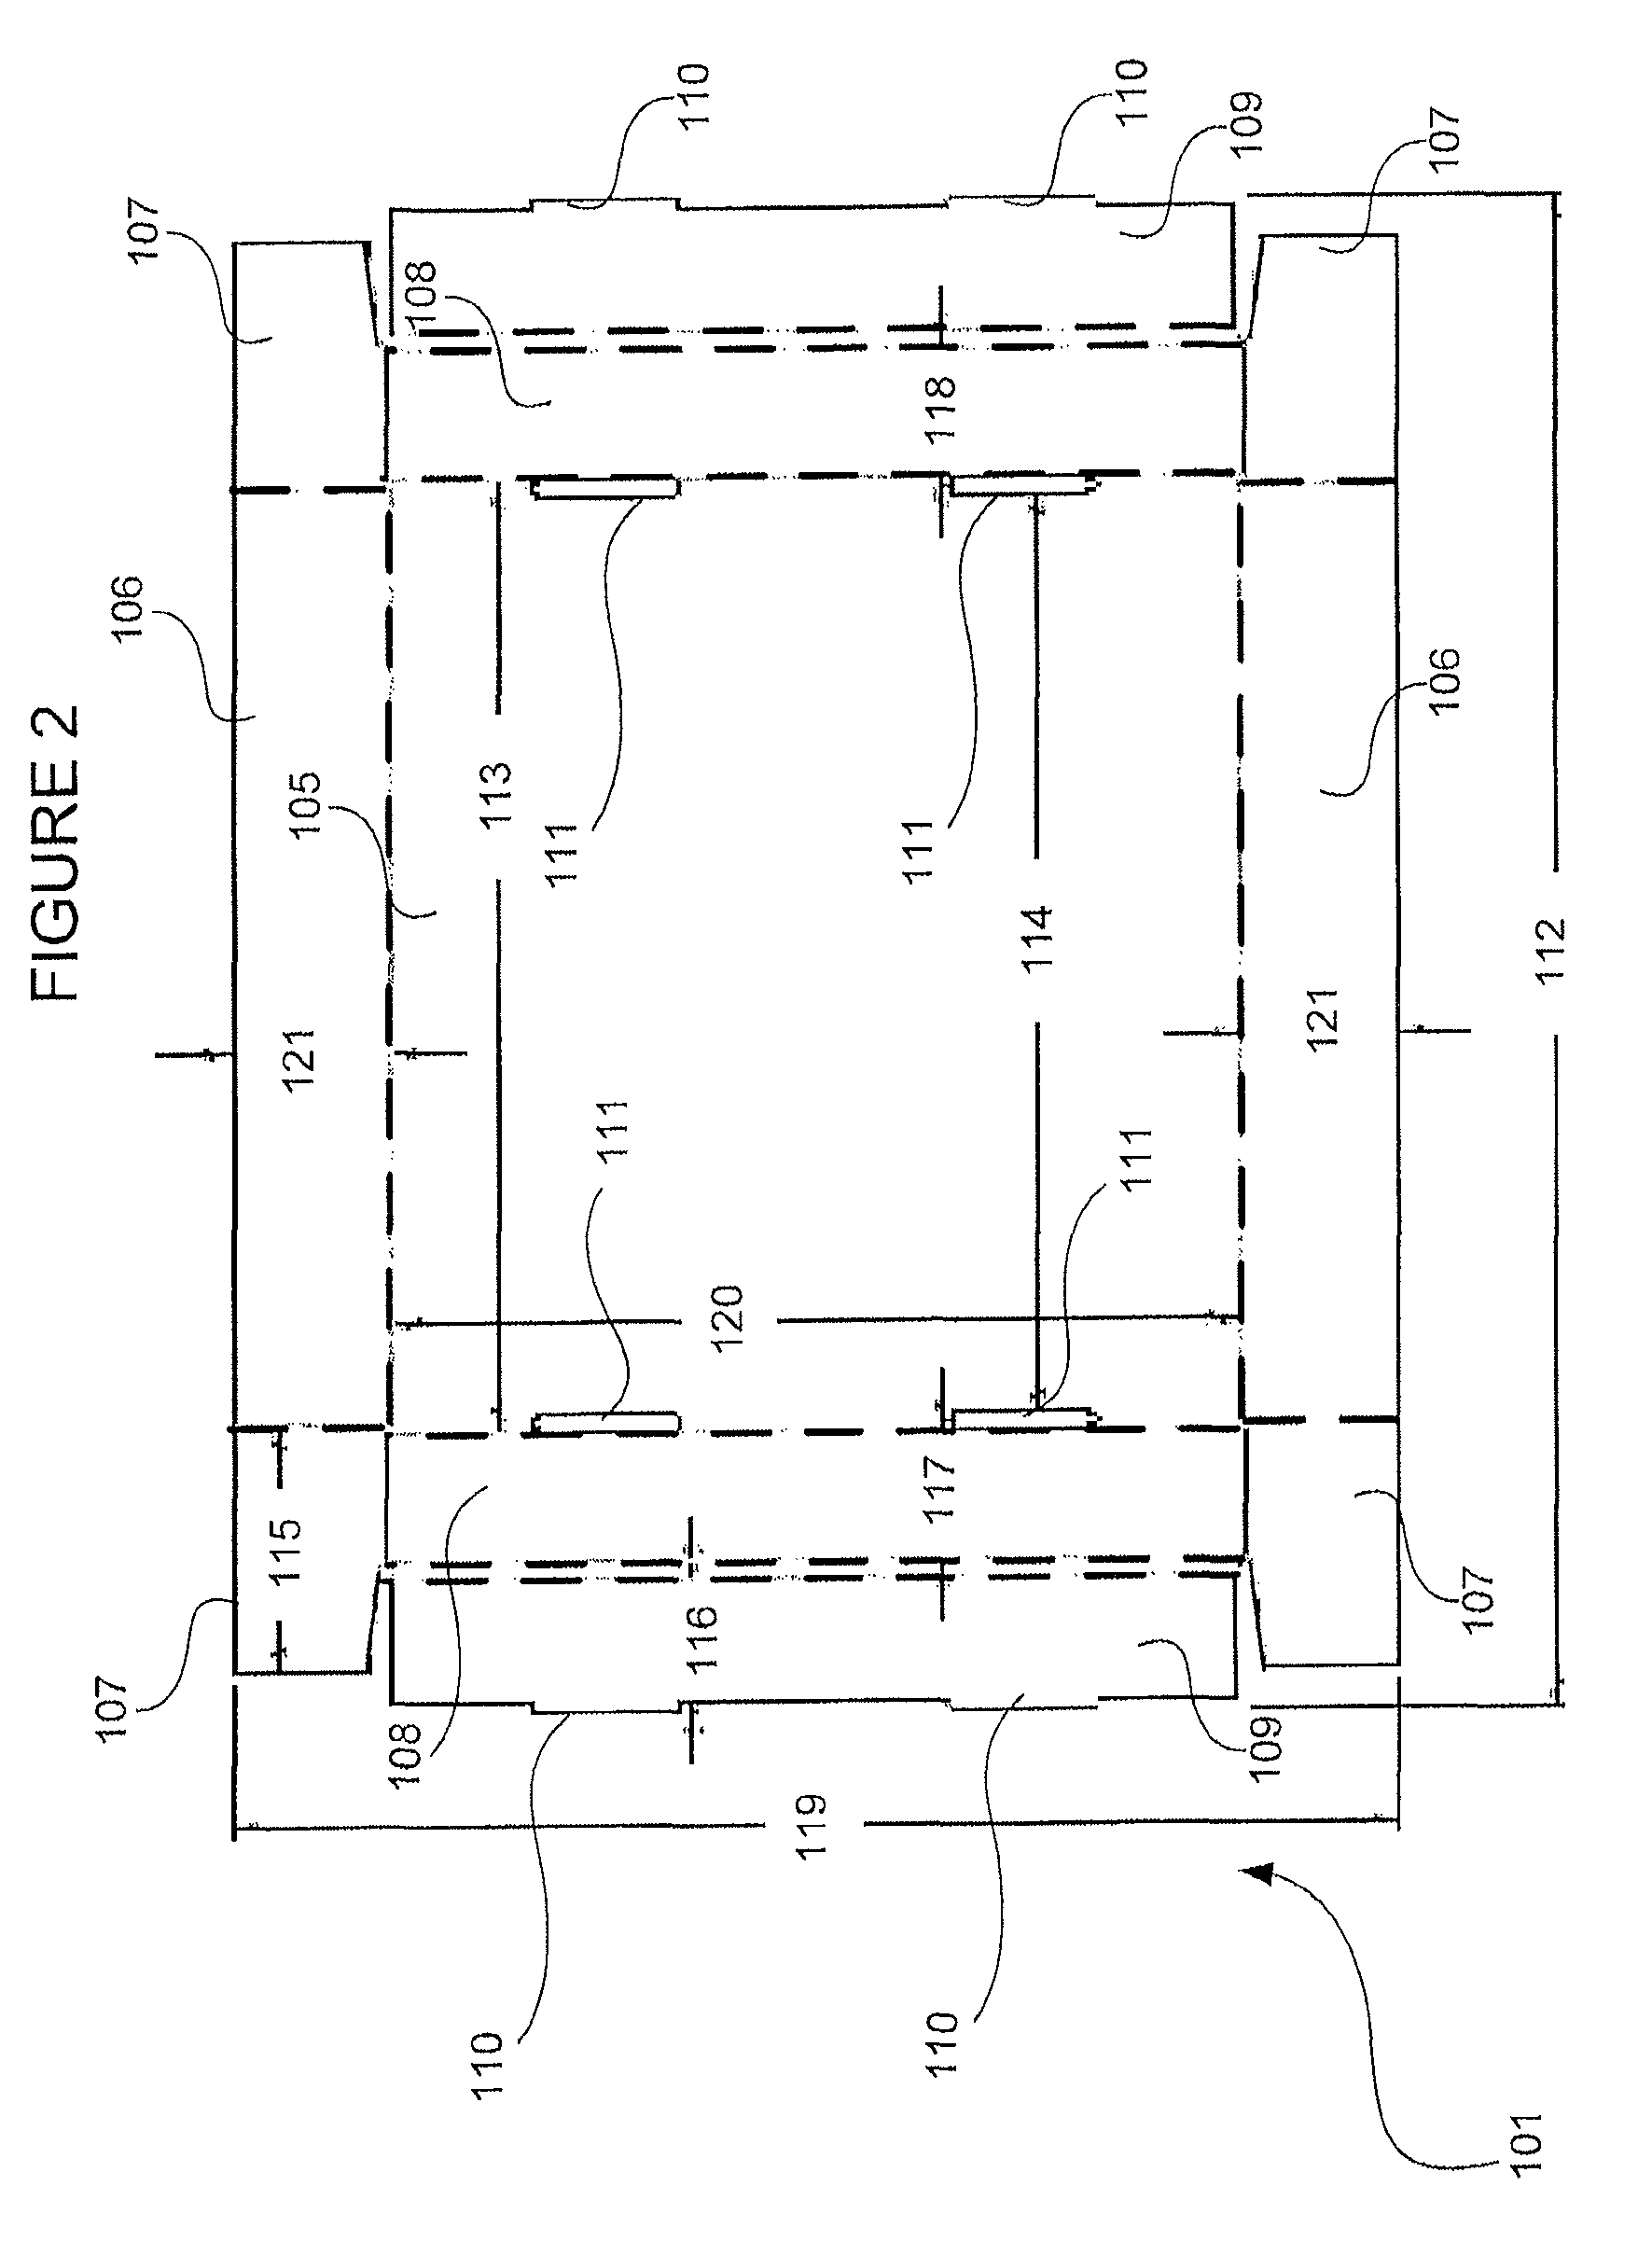 Materials for and method for manufacturing container with integrated divider and resulting container